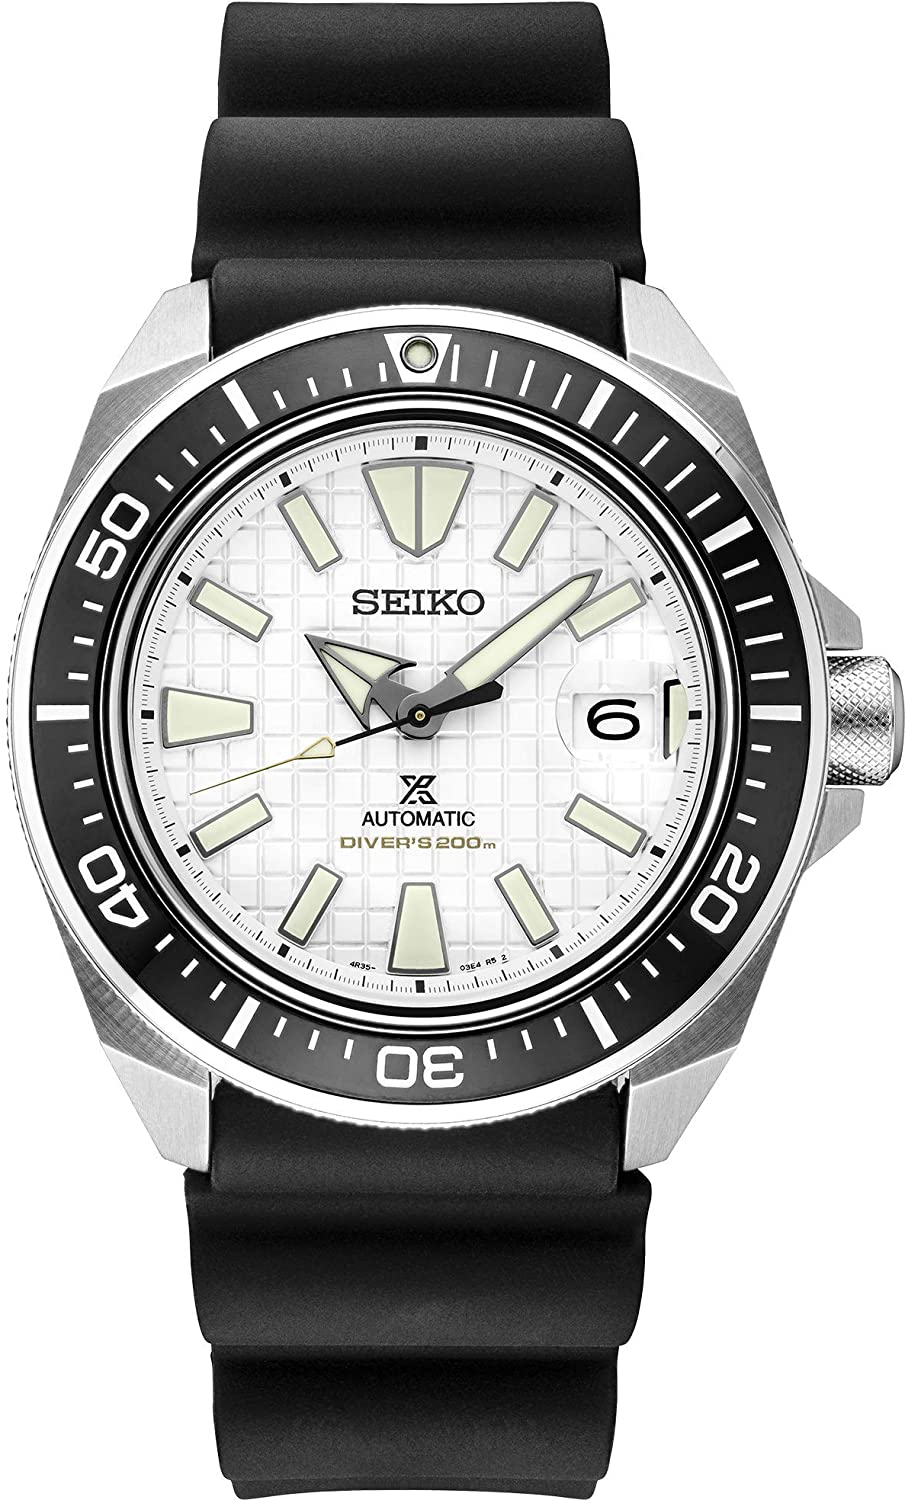 5 Of The Most Popular White Dial Seiko Watches